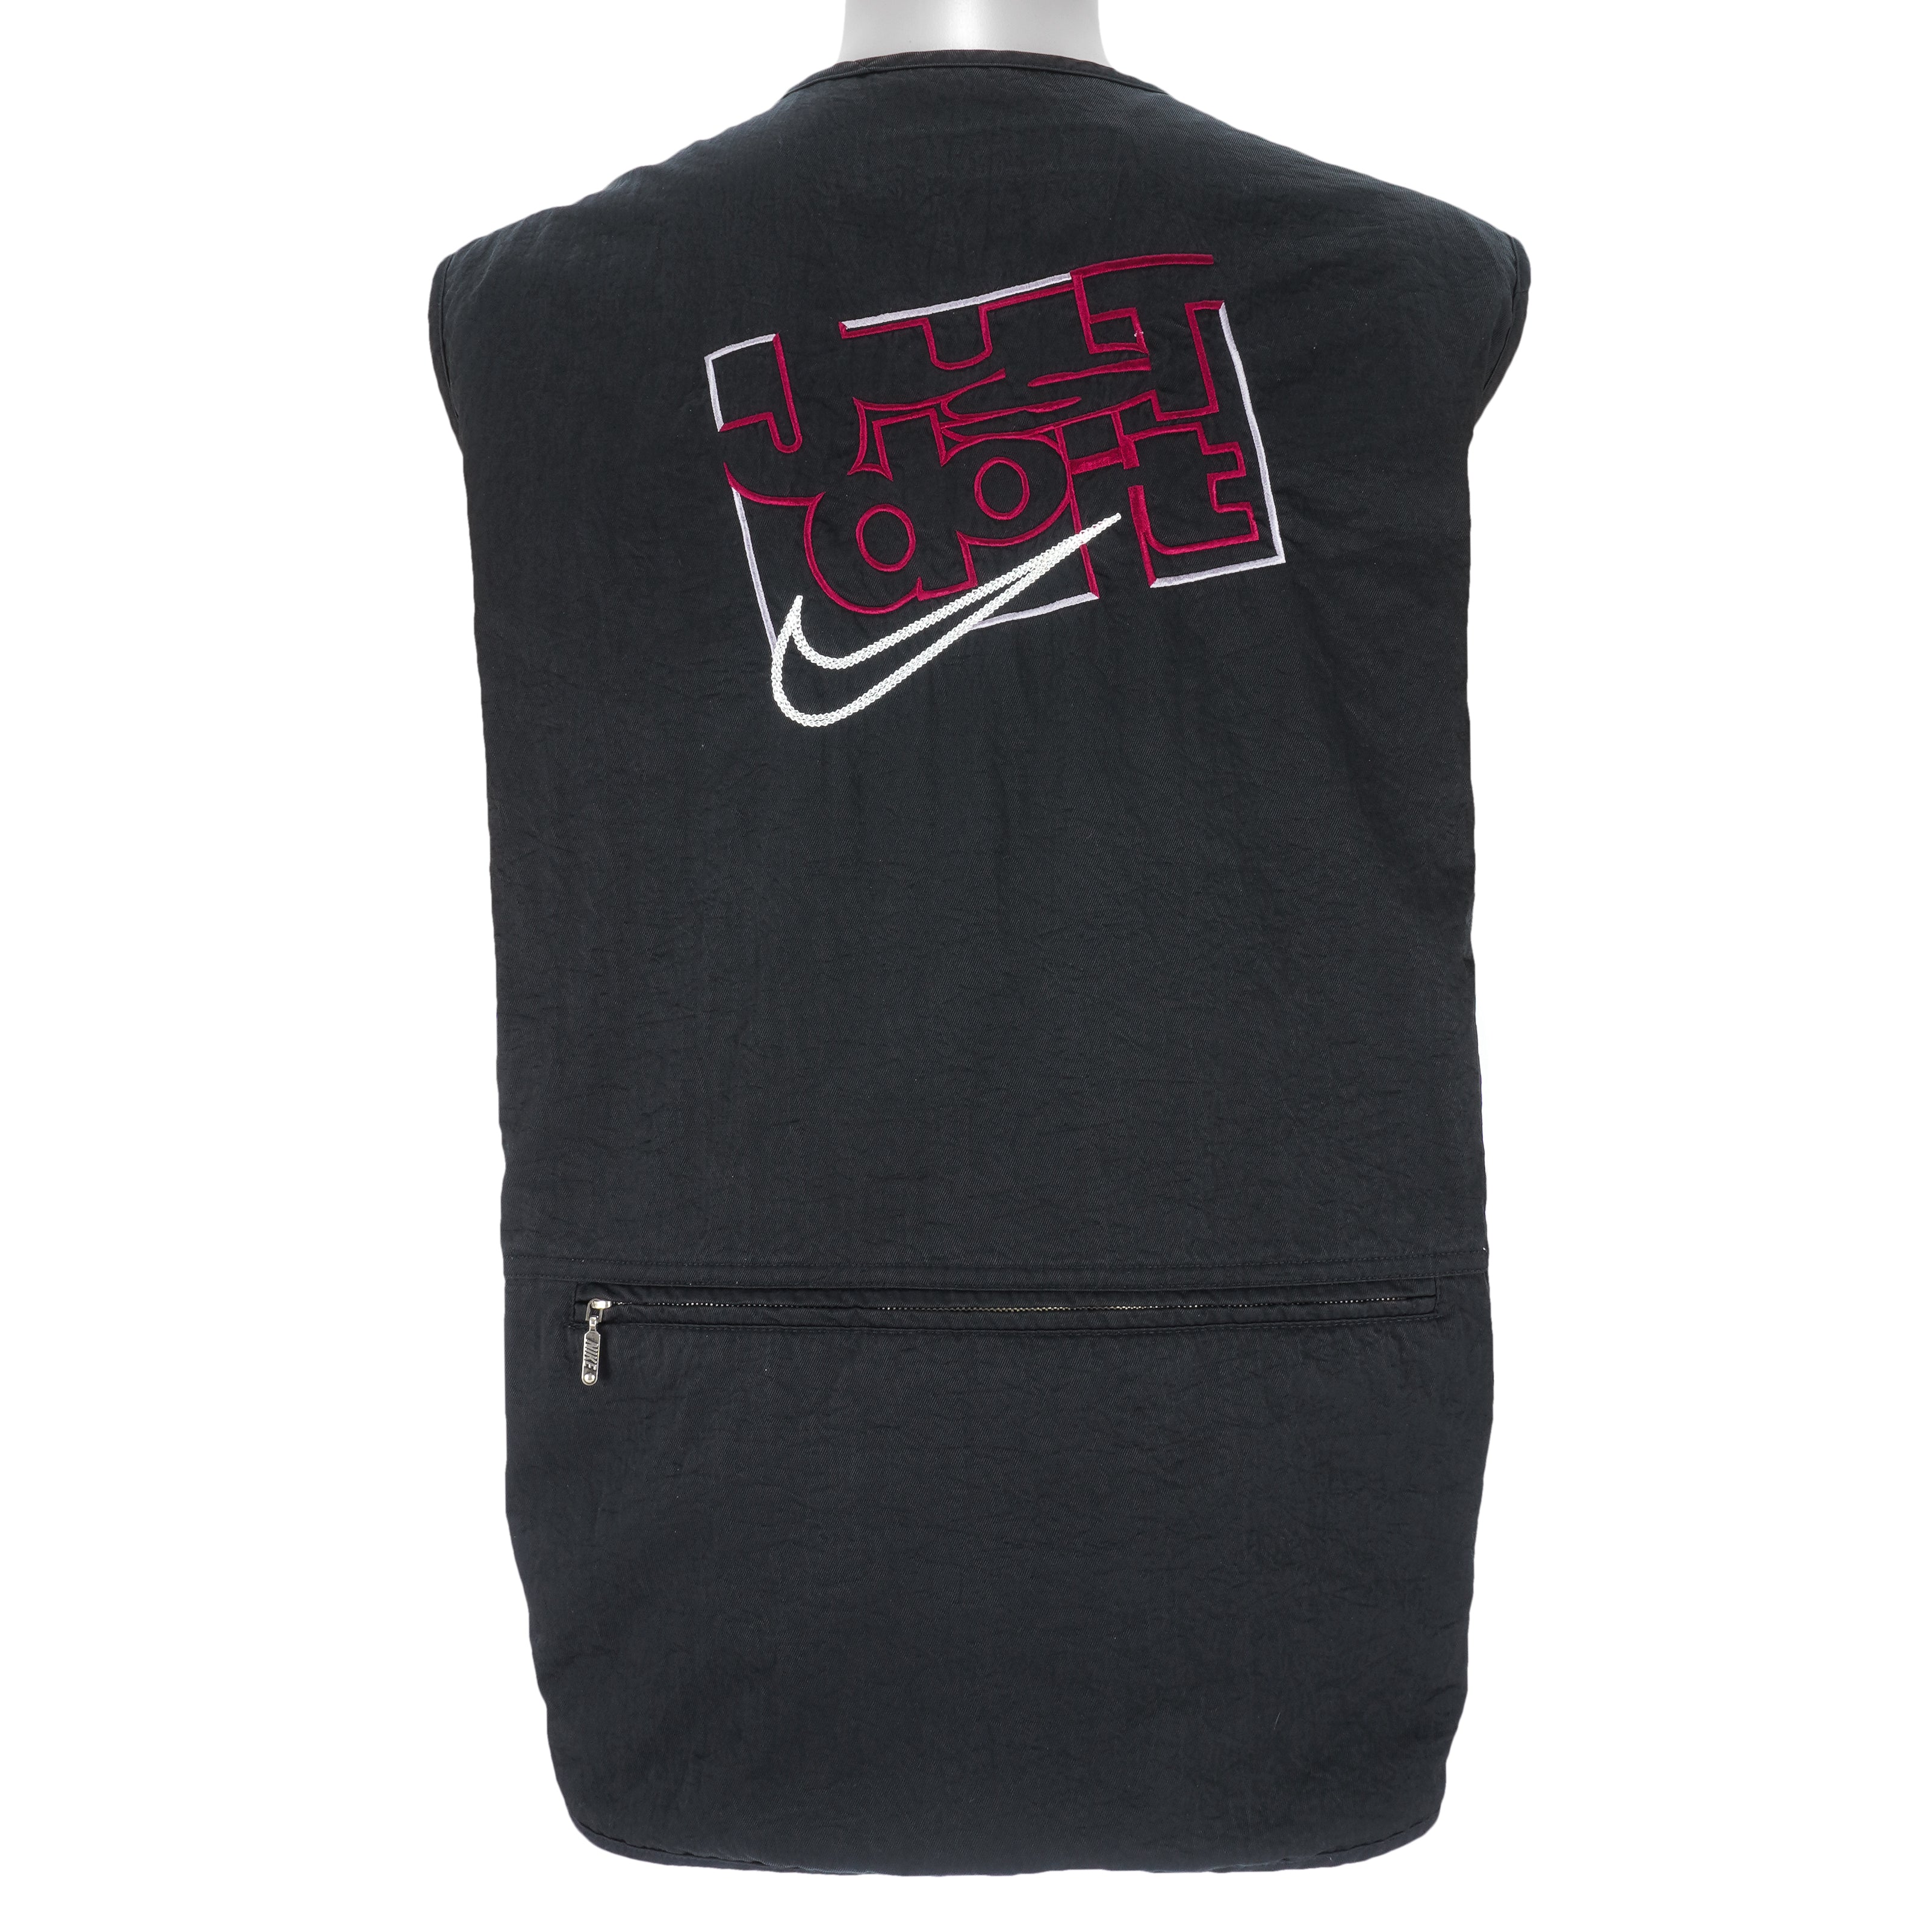 Nike Just Do It Red Black And White Bomber Jacket - Tagotee